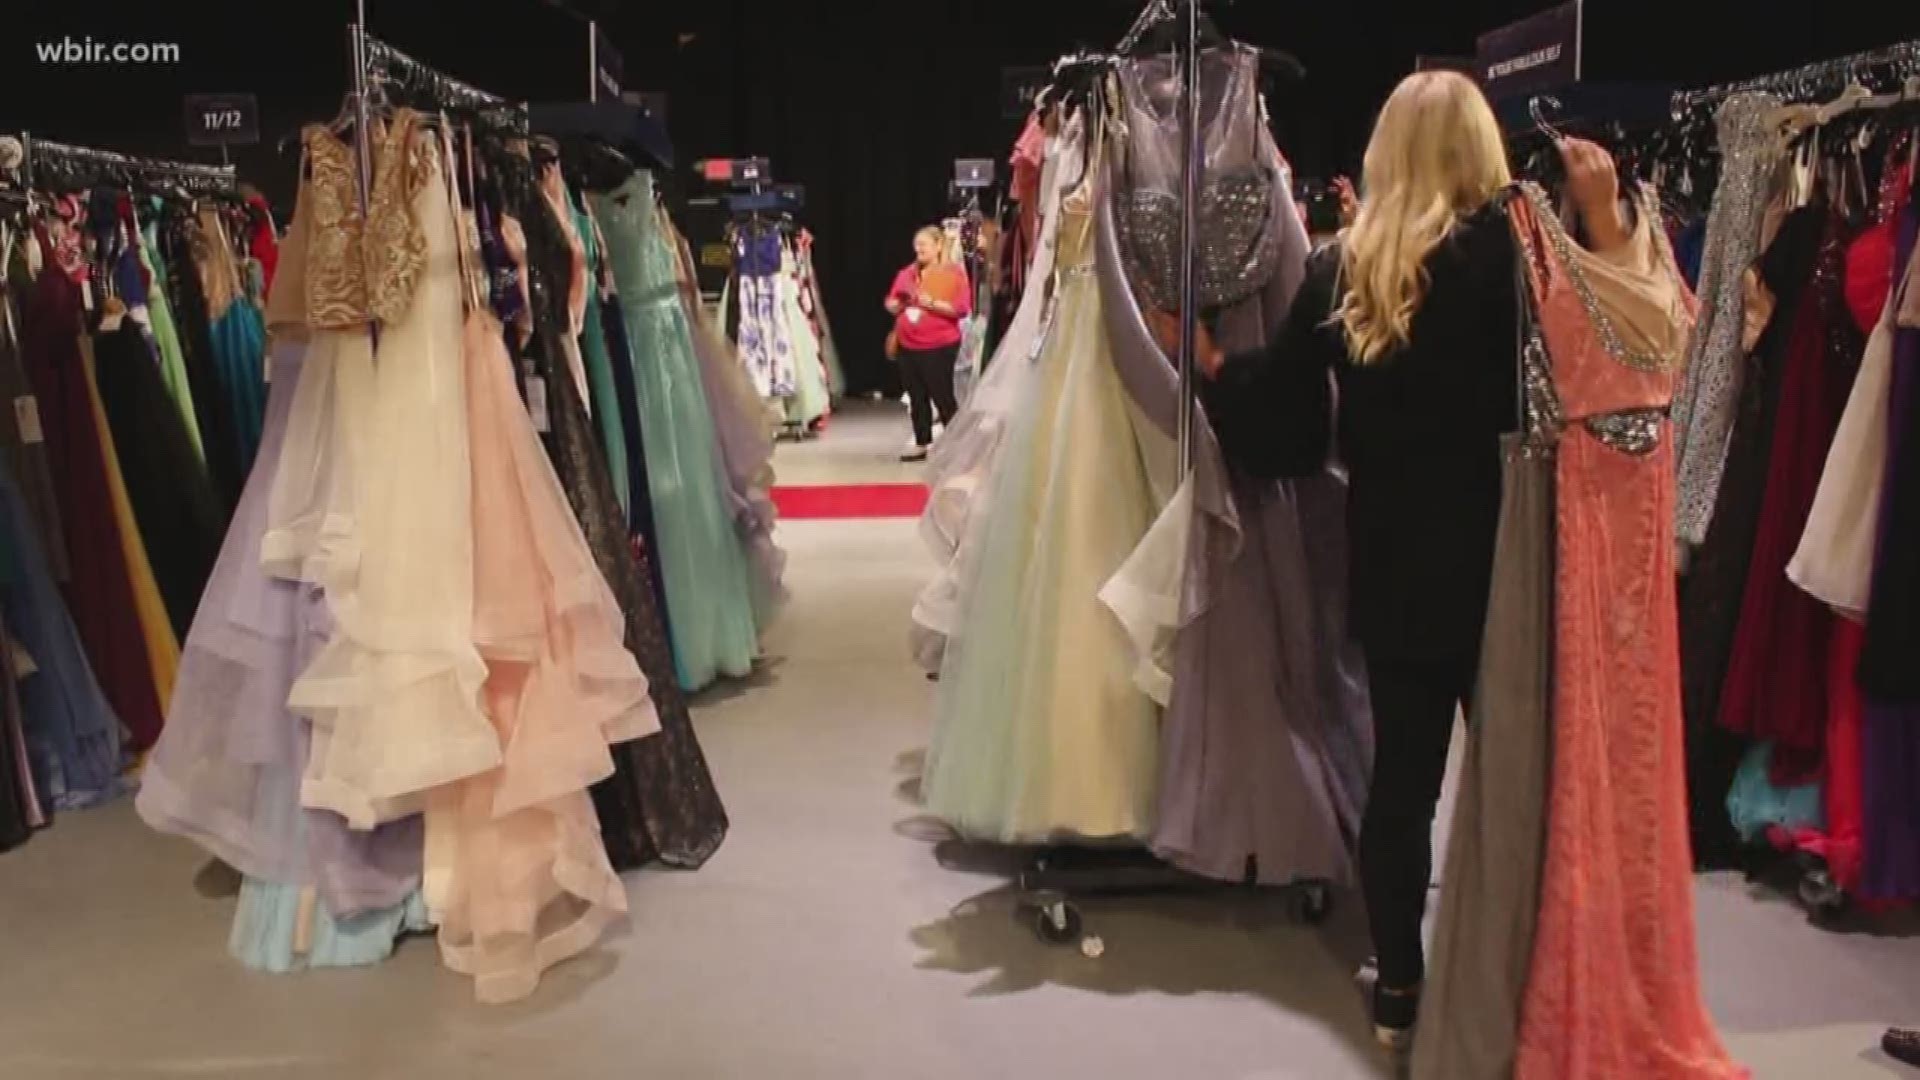 March 29, 2018: More than 200 Knox County students will soon go to prom wearing new dresses and suits, thanks to TLC and Discovery.